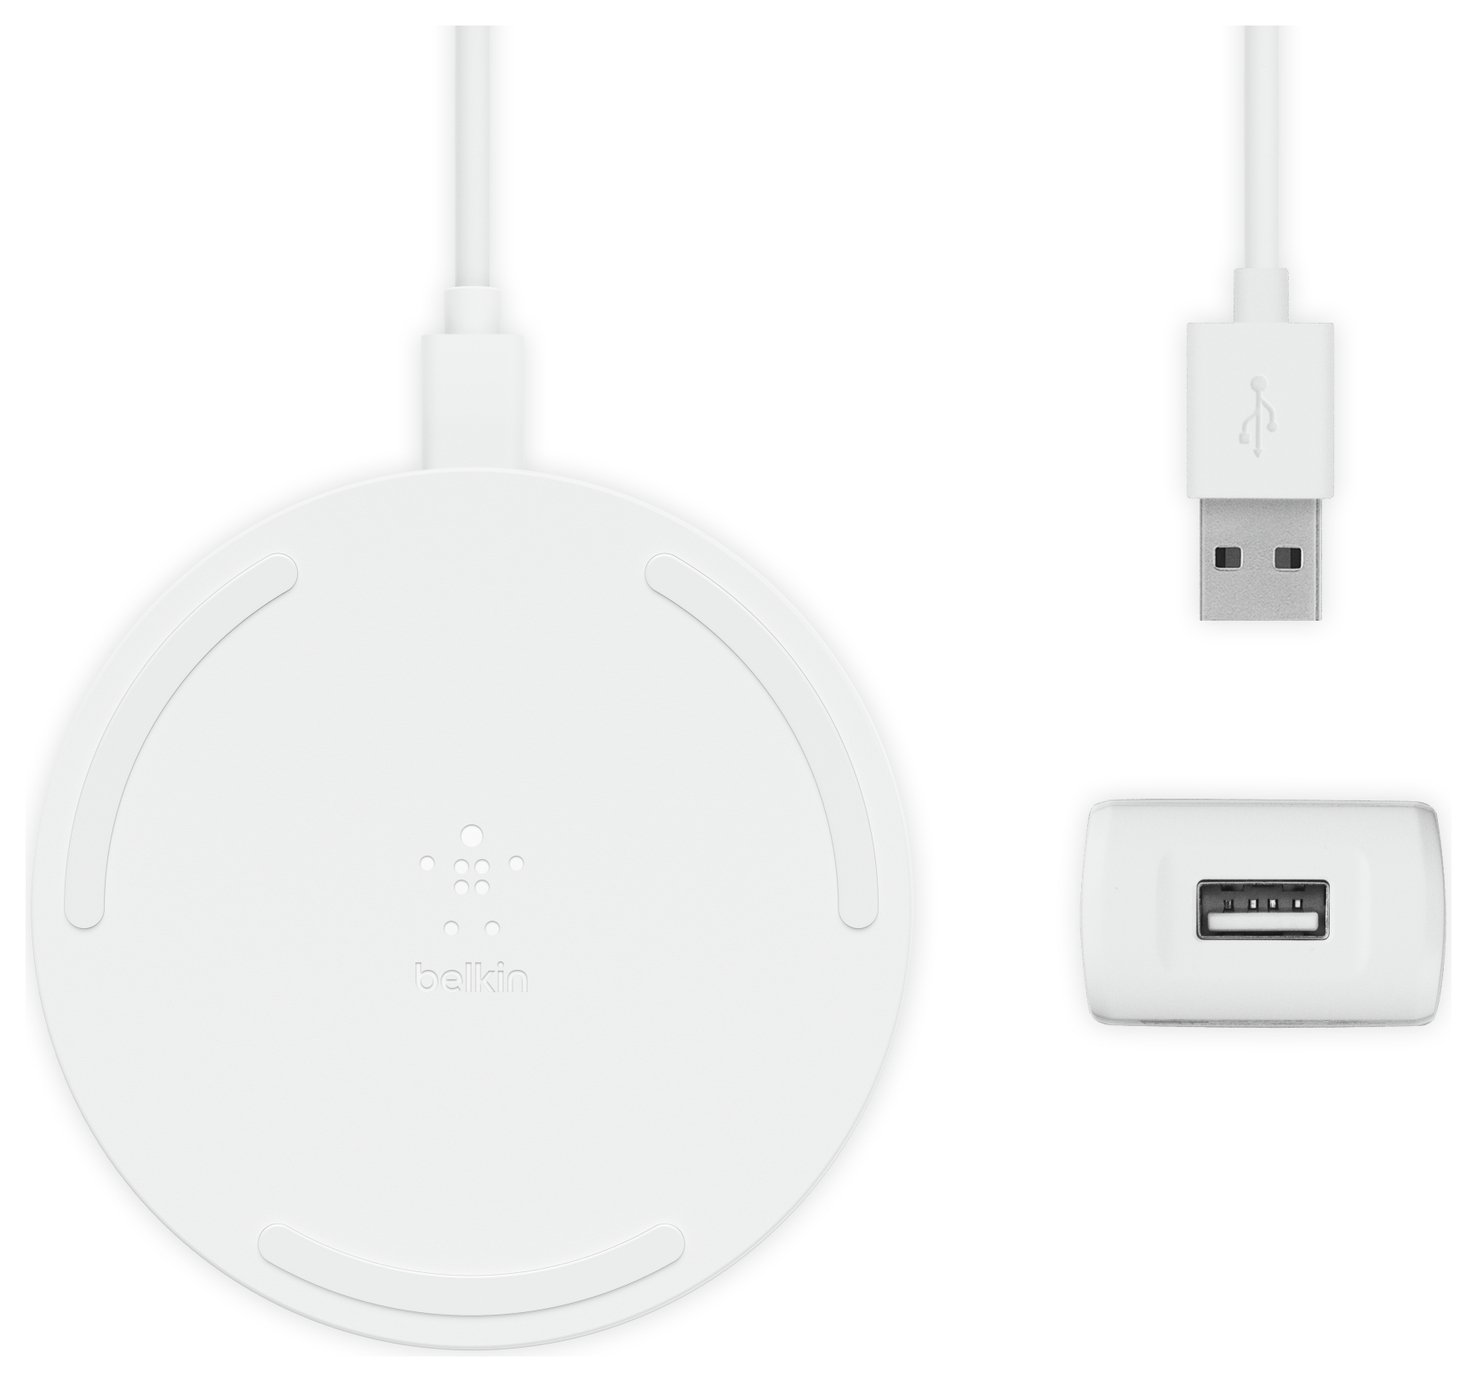 Belkin 10W Qi Wireless Charger Pad with Plug - White